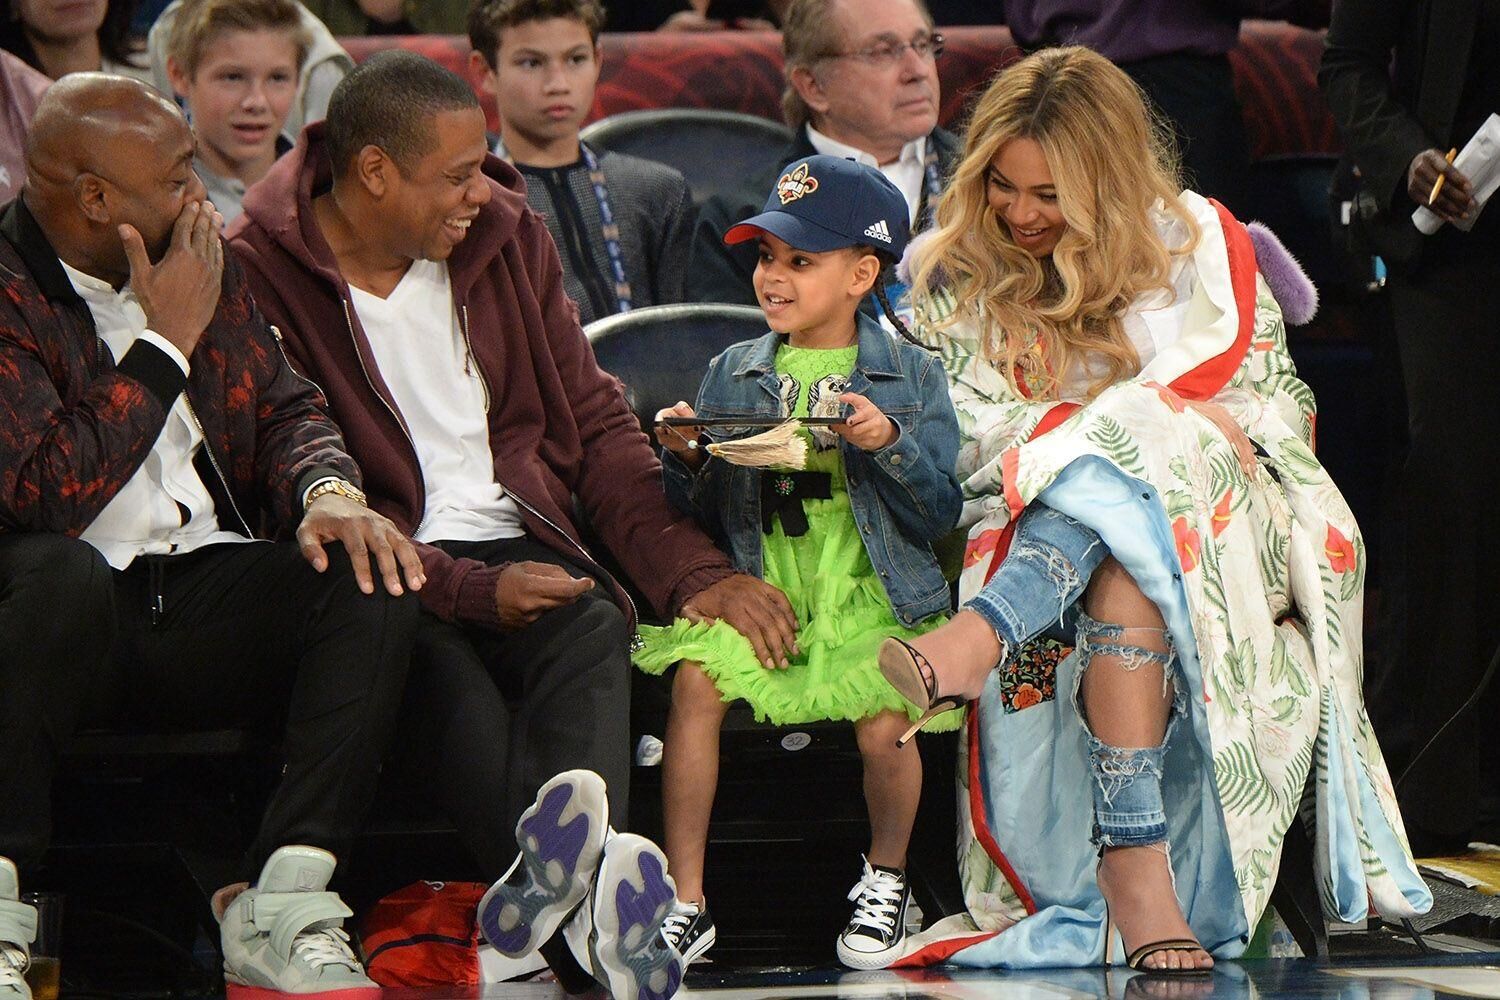 Beyoncé and Jay Z Reportedly Adopting Another Baby - In Touch Weekly